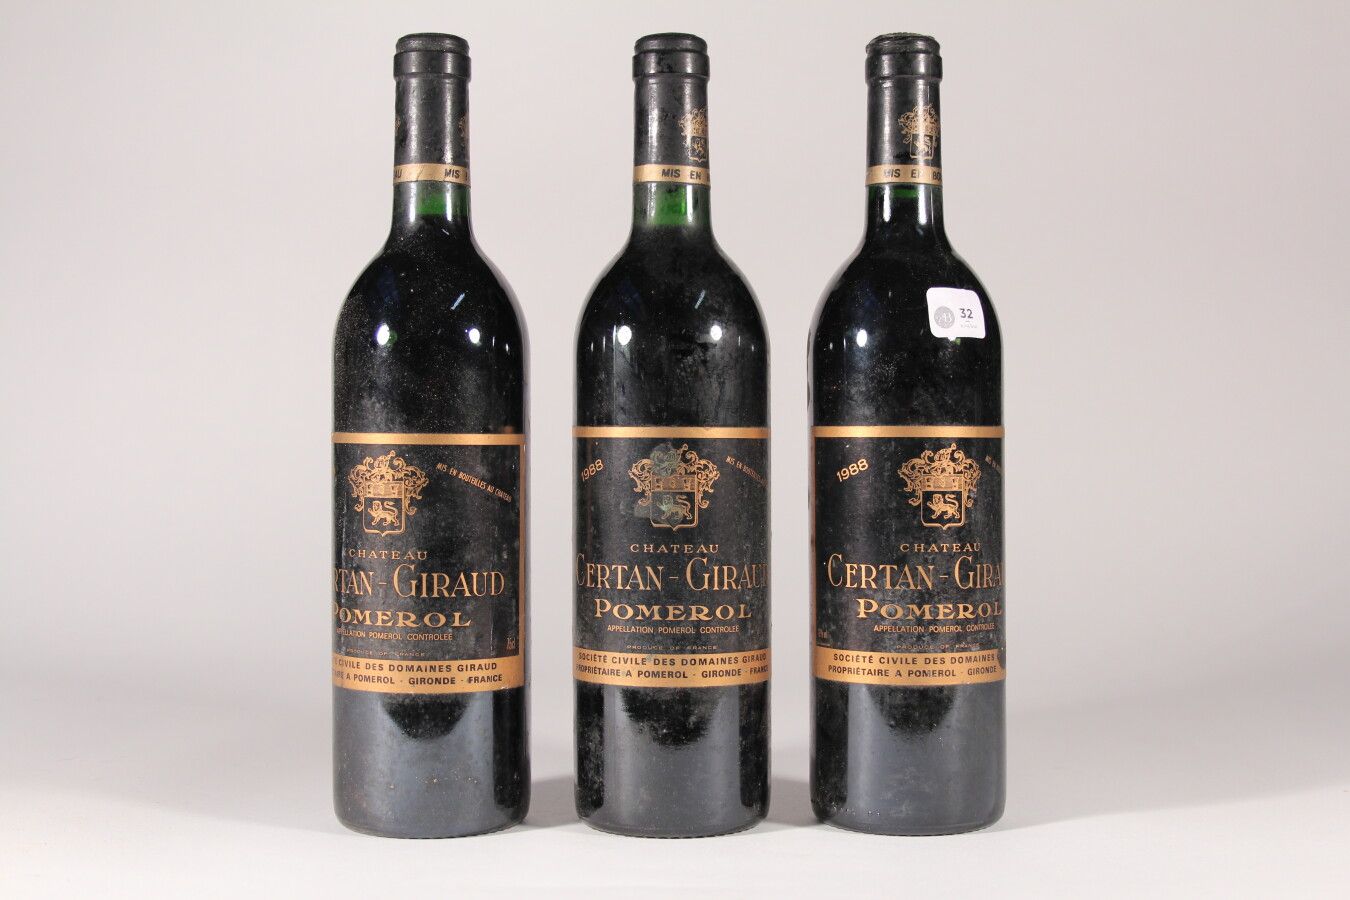 Null 1988 - Château Certan Guiraud

Pomerol Rouge - 3 blles